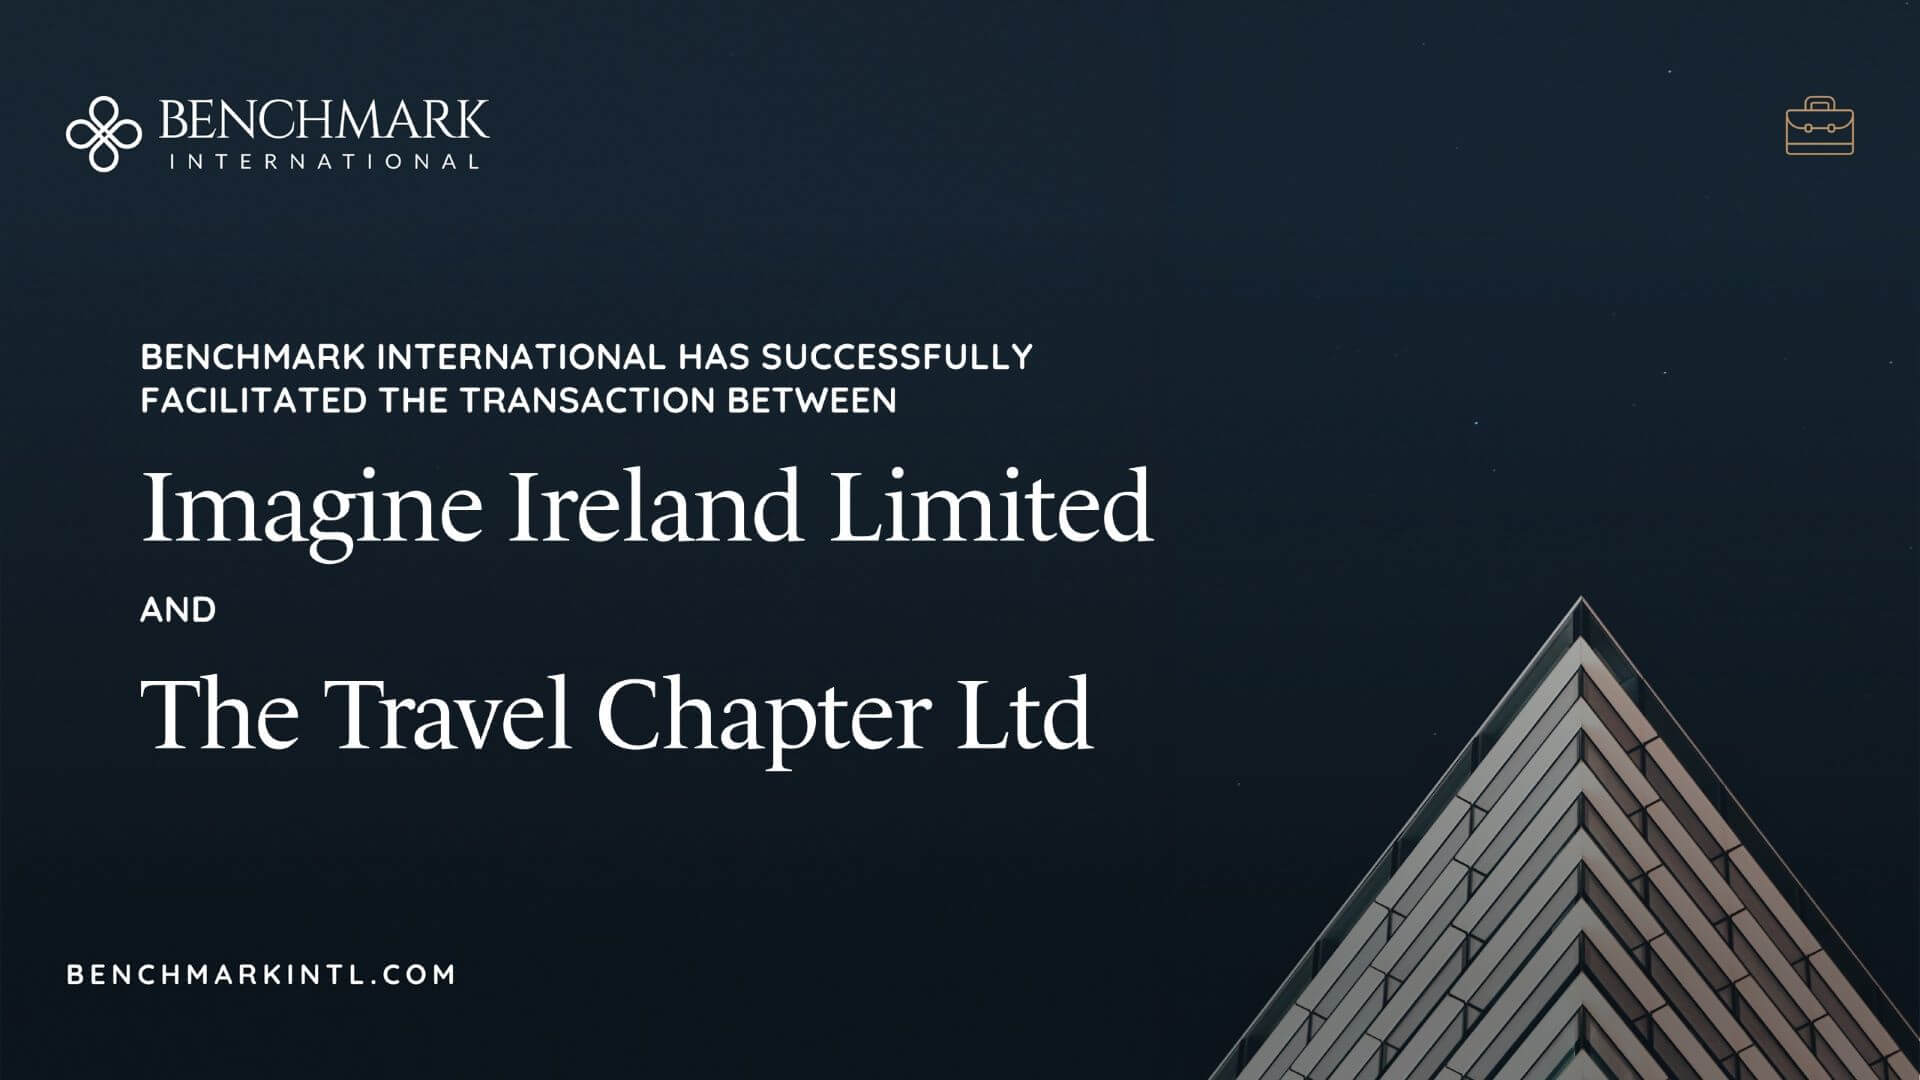 Benchmark International Successfully Facilitated the Transaction Between Imagine Ireland Limited and The Travel Chapter Ltd